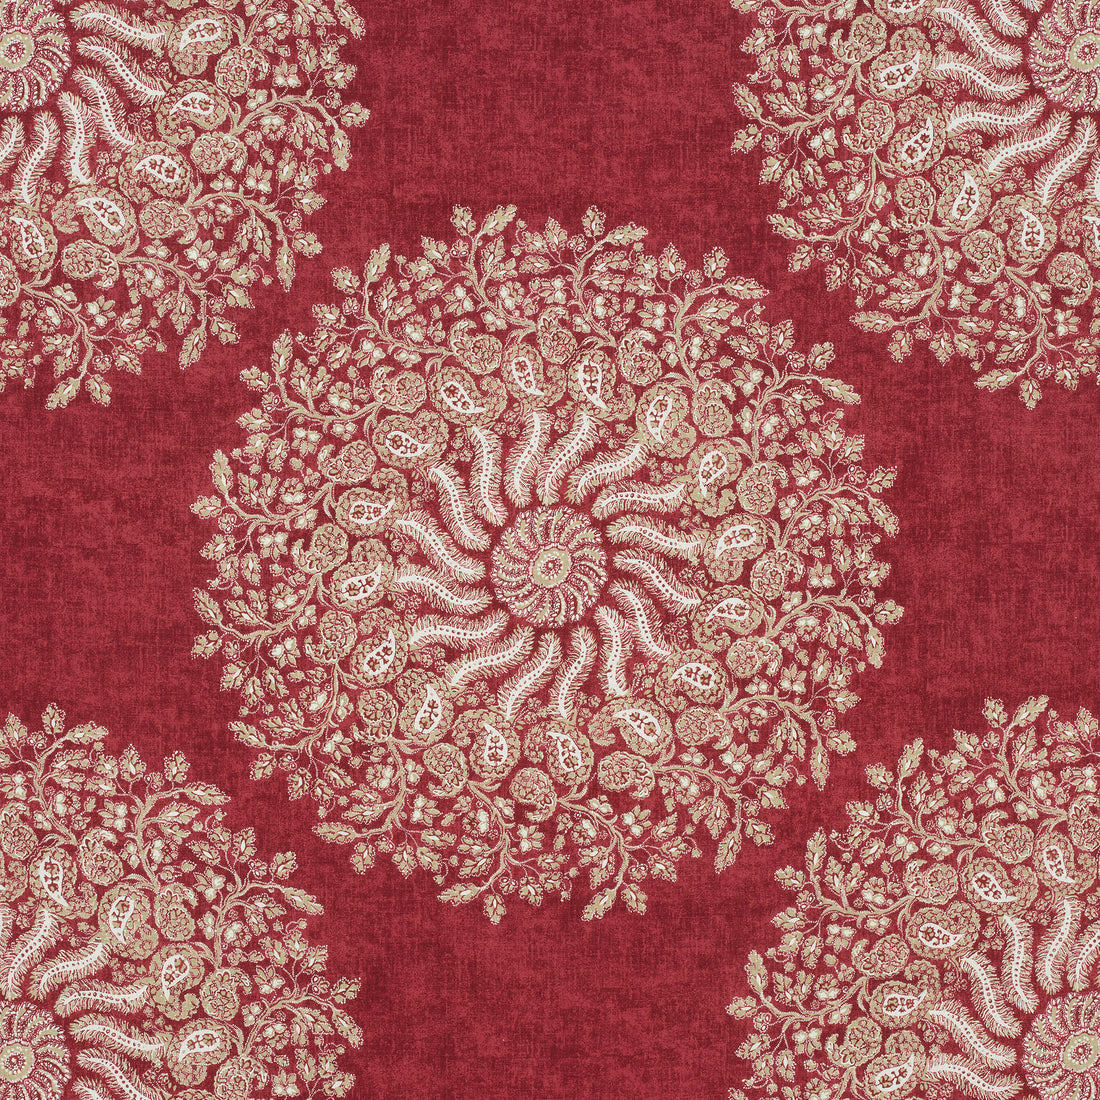 La Provence fabric in red color - pattern number AF78728 - by Anna French in the Palampore collection